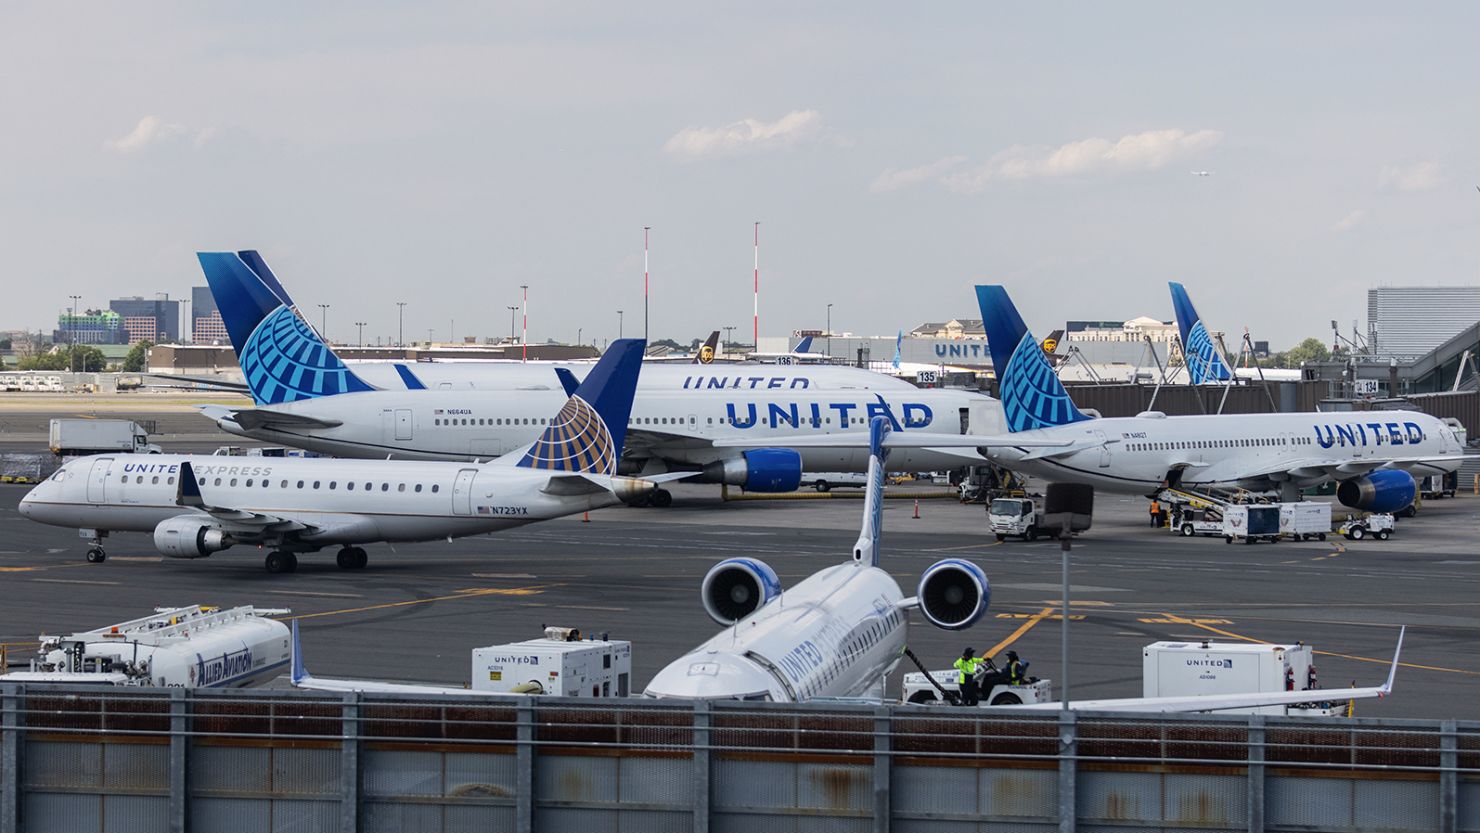 United Airlines aircraft are seen at Newark Liberty International Airport (EWR) on July 1, 2022 in Newark, New Jersey. Hundreds of flights were canceled across the US ahead of July Fourth weekend. 